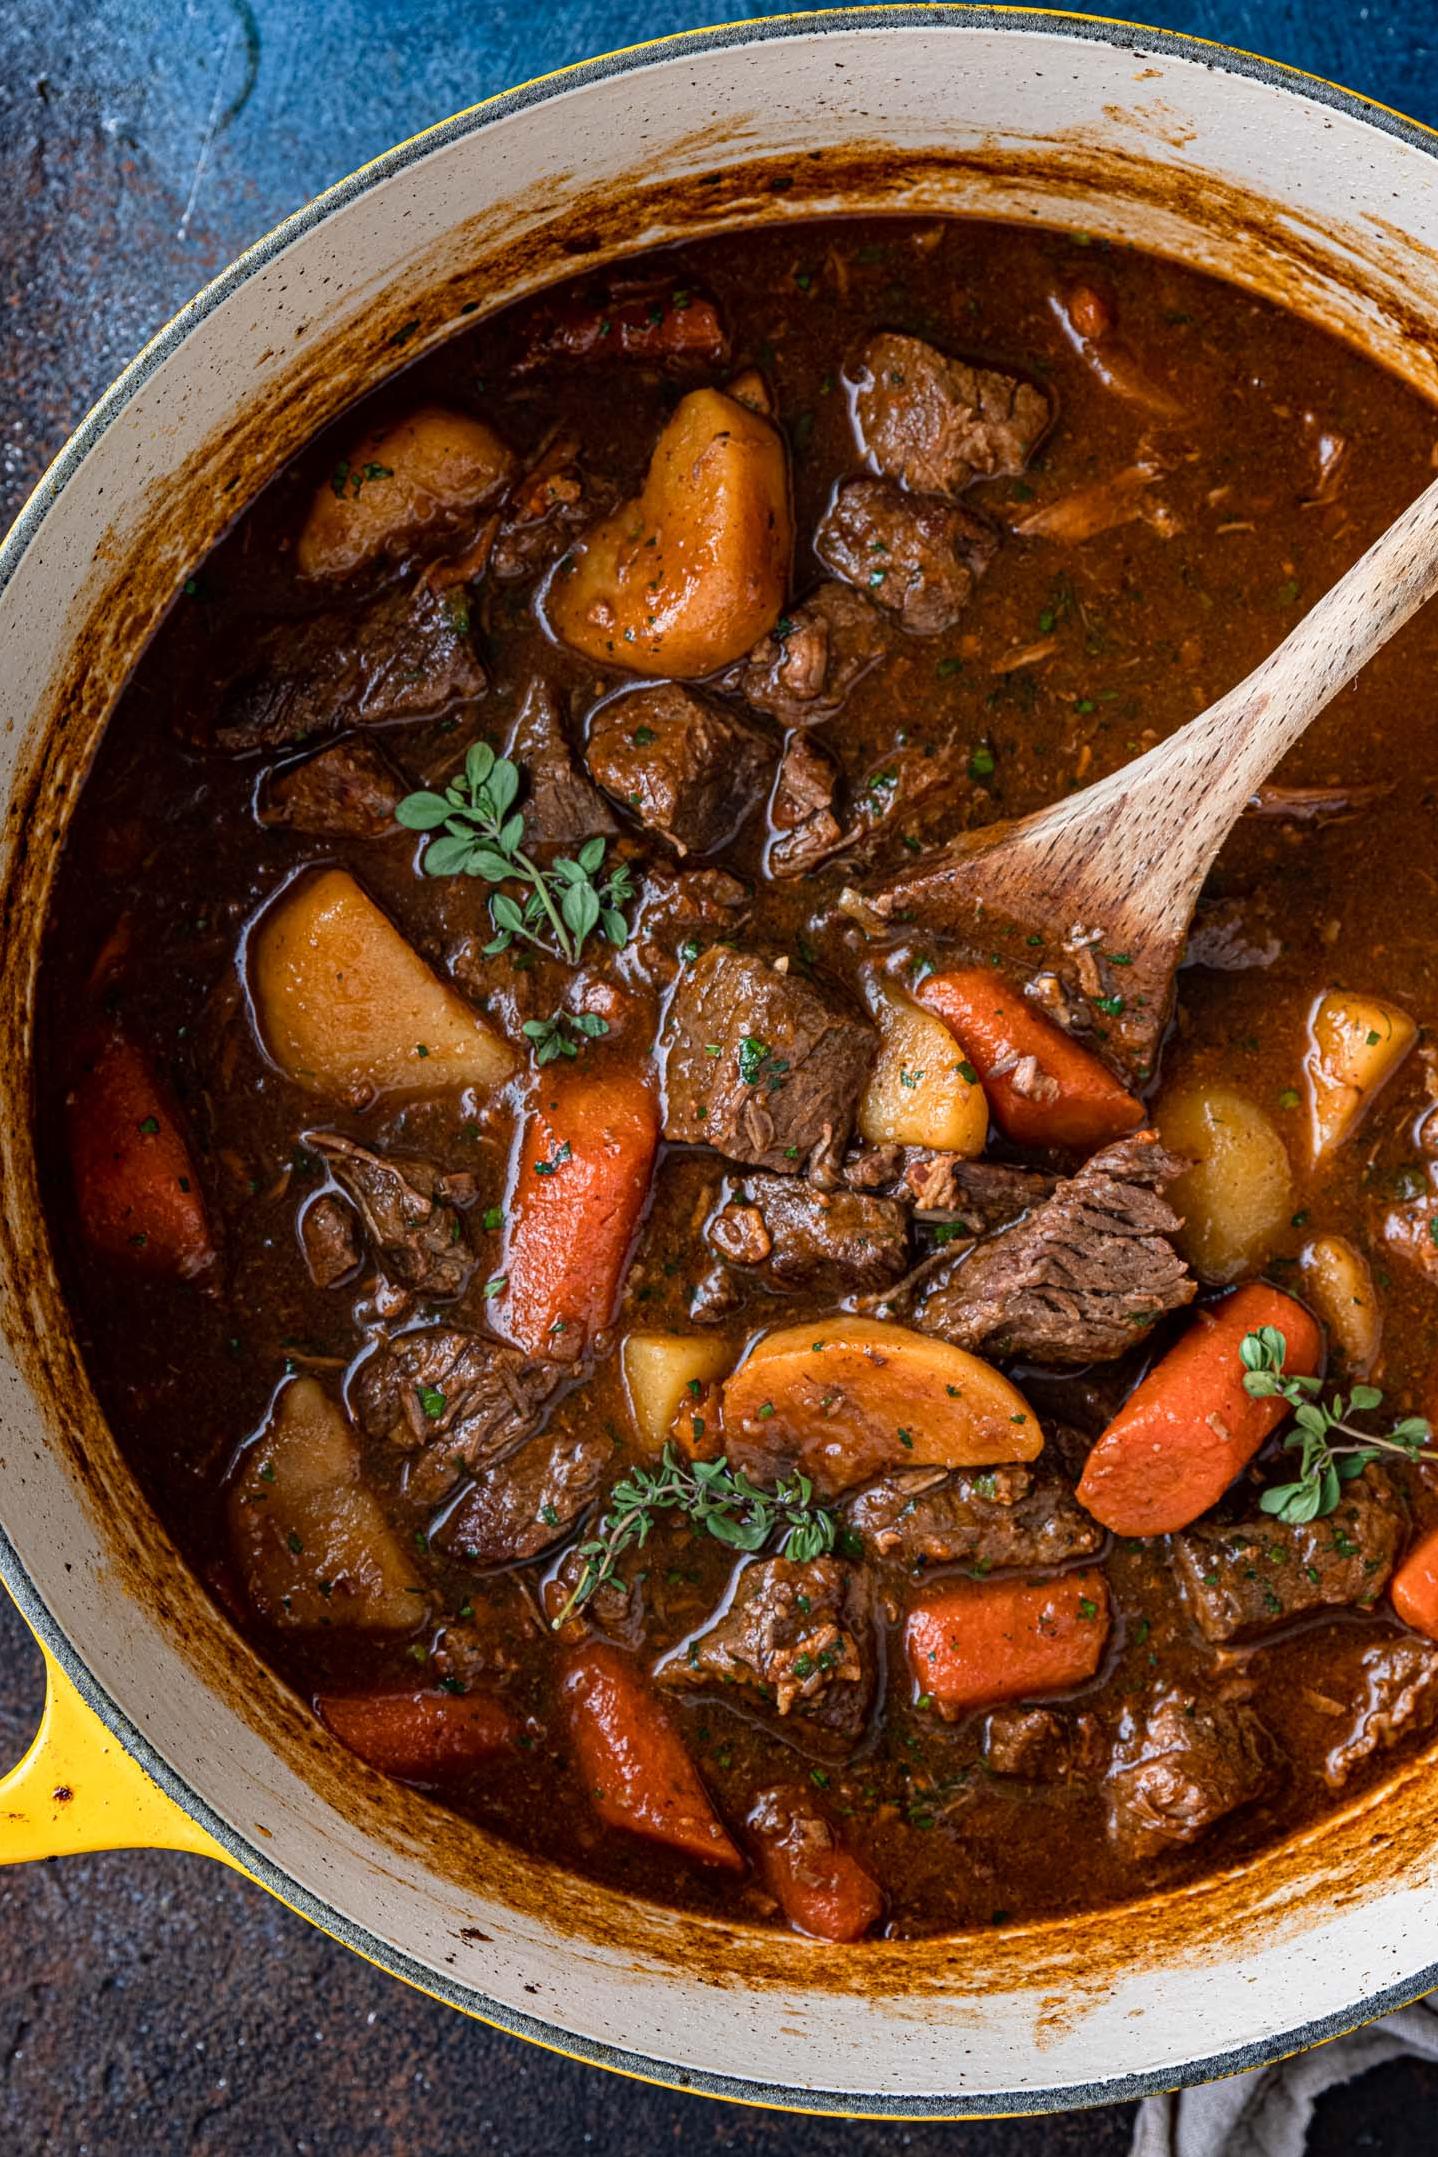  Your taste buds will be singing at the sight of this colorful and aromatic stew.